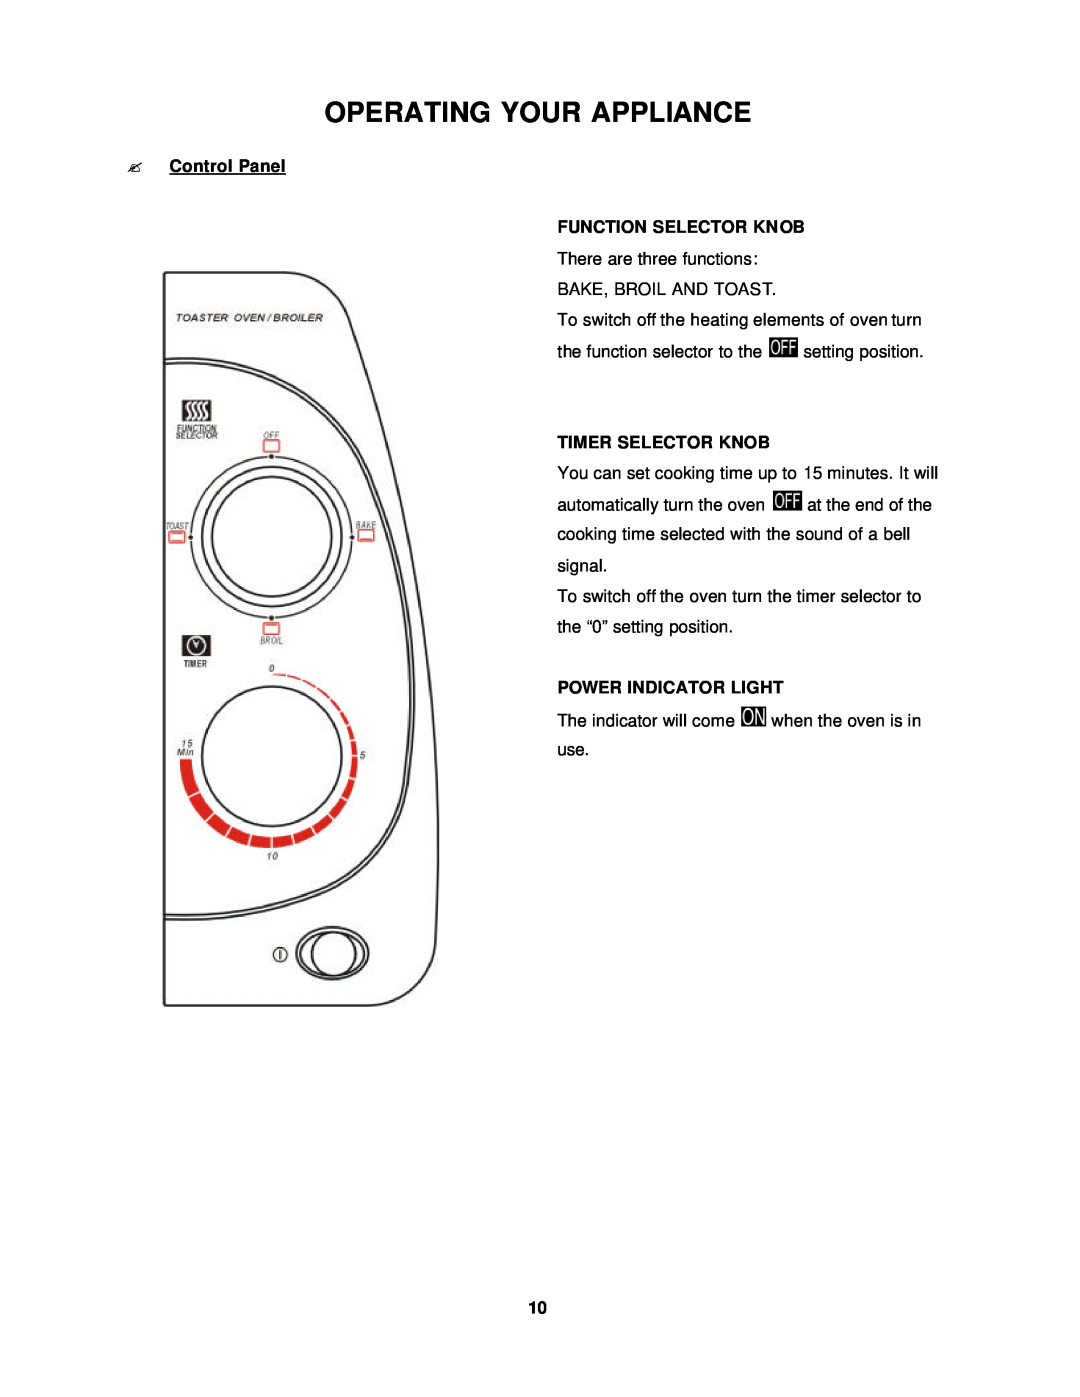 Avanti T-9 Operating Your Appliance, ? Control Panel FUNCTION SELECTOR KNOB, Timer Selector Knob, Power Indicator Light 